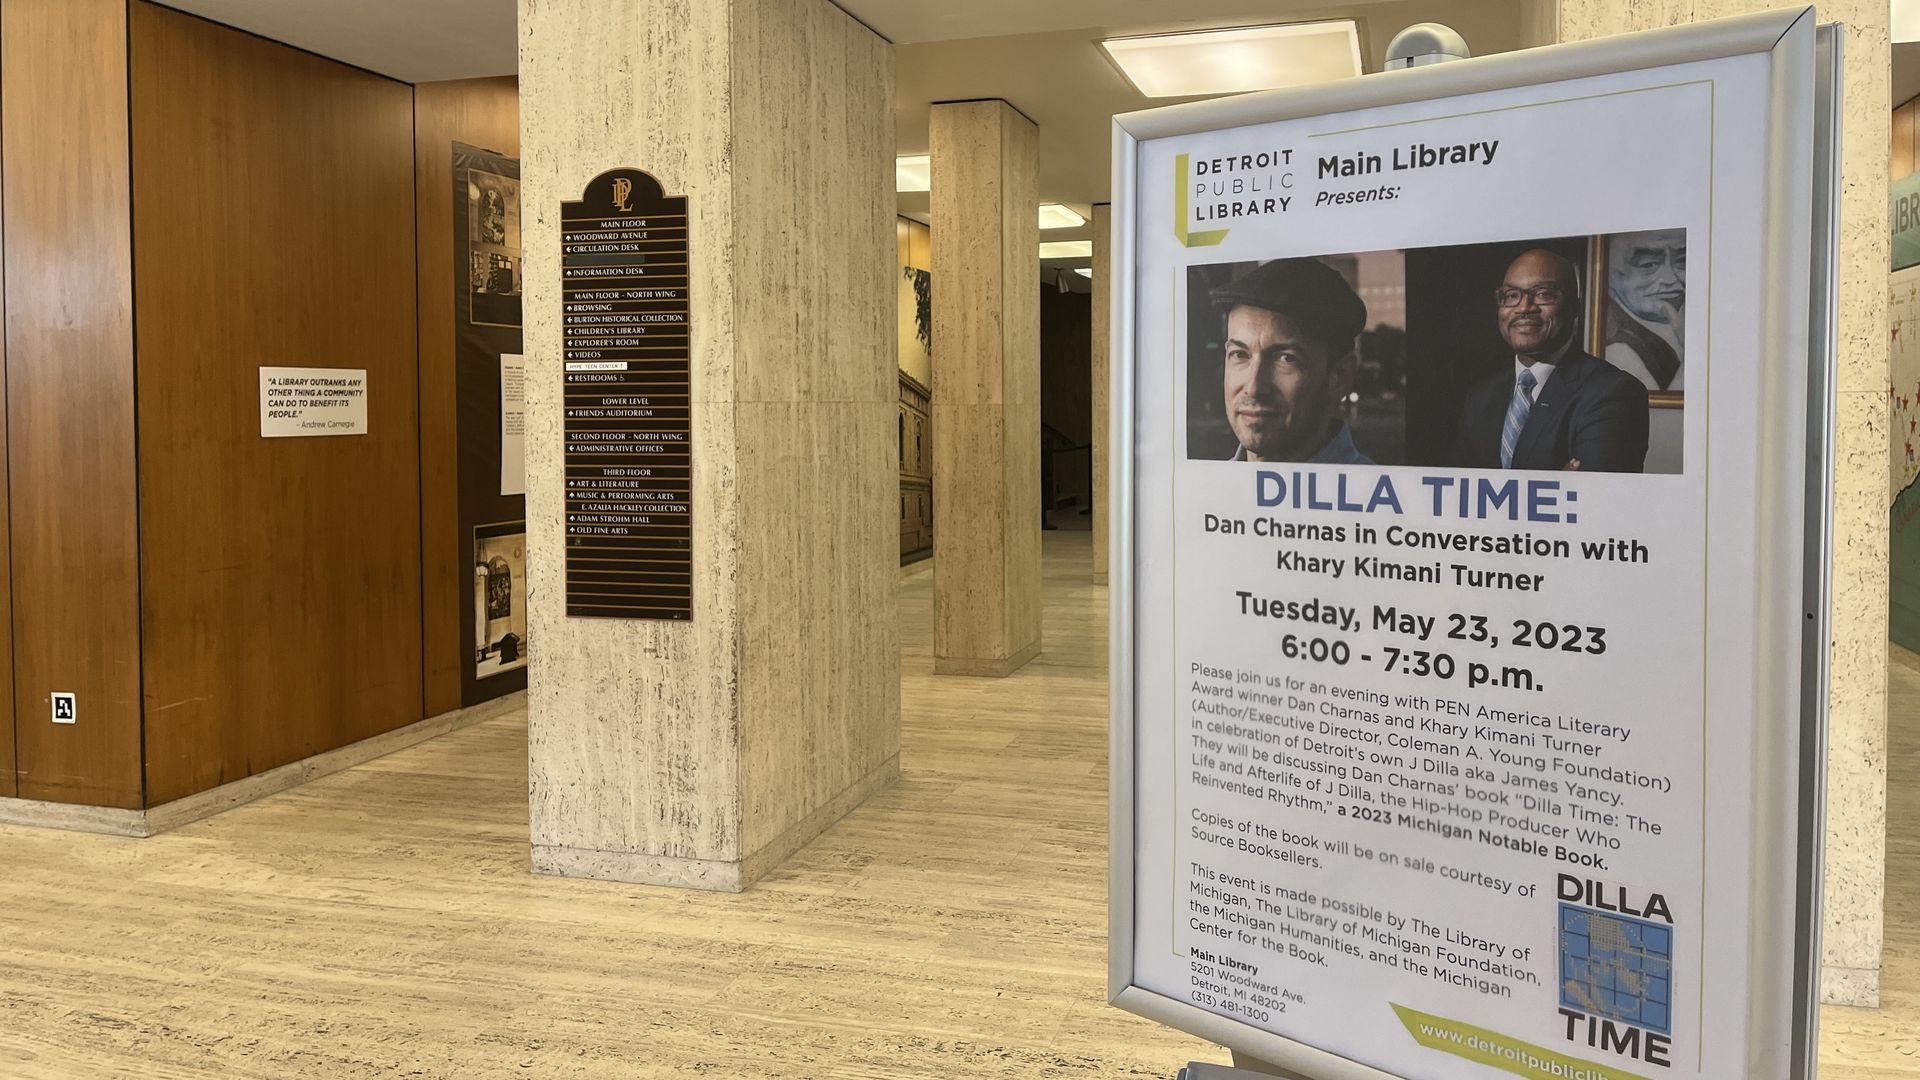 Signage for May 23, 2023 Detroit Public Library event with "Dilla Time" author Dan Charnas.